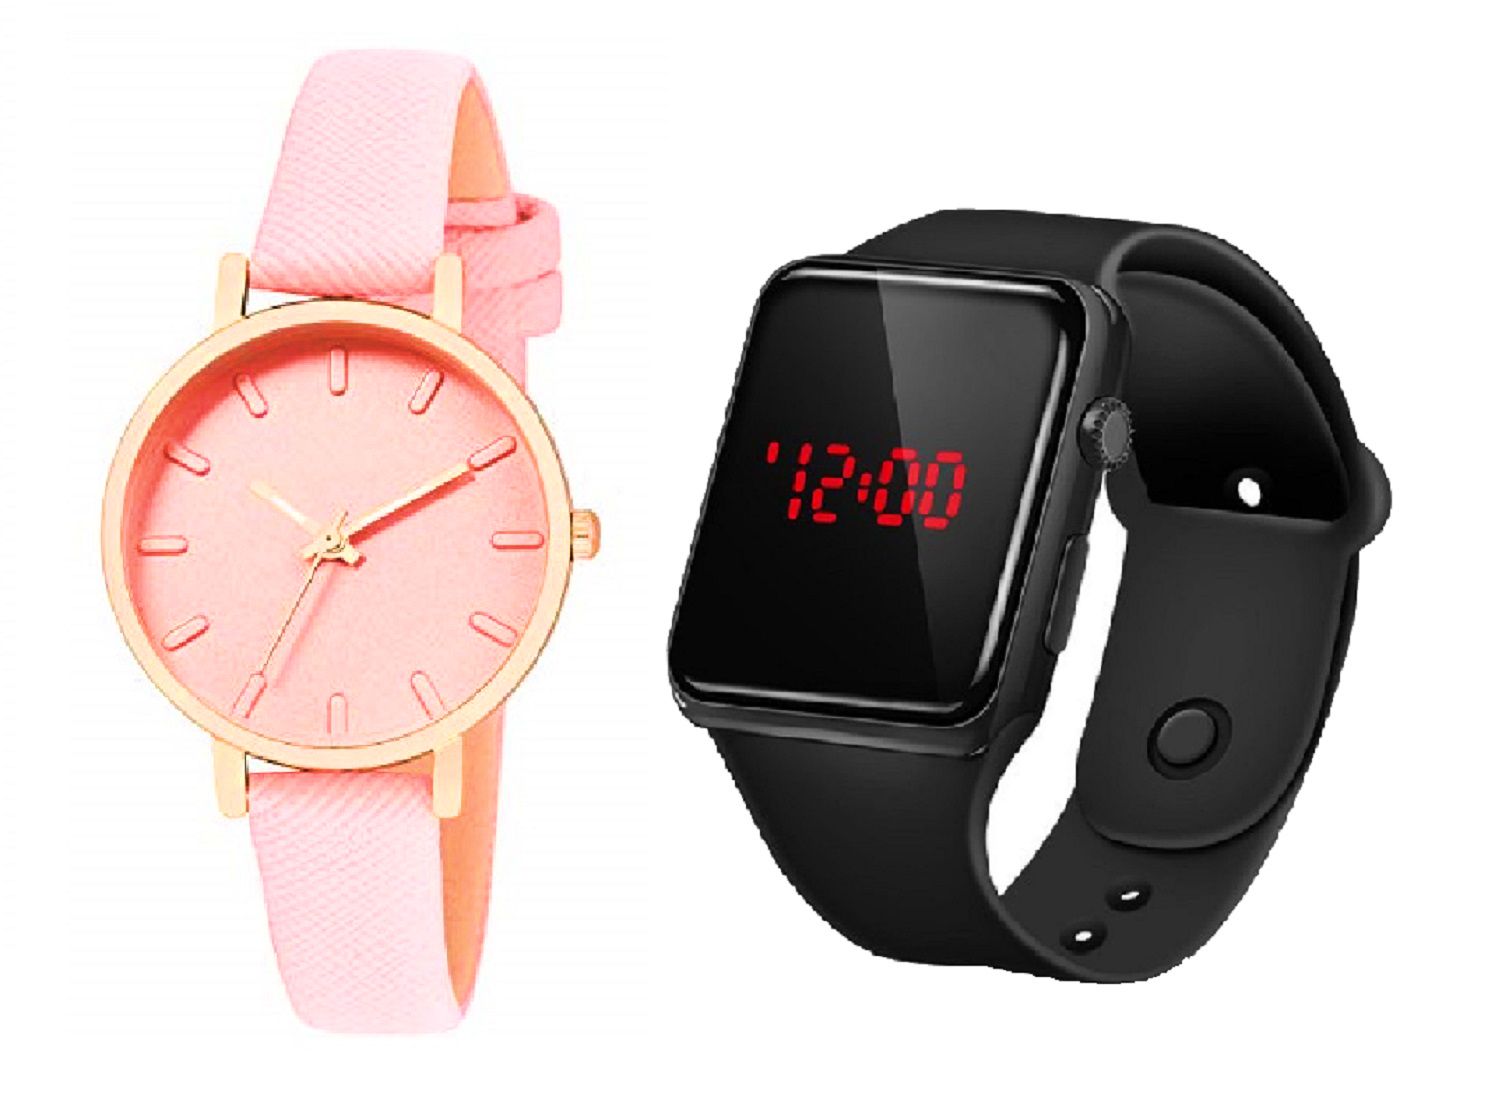     			Cosmic - Pink Leather Analog Couple's Watch